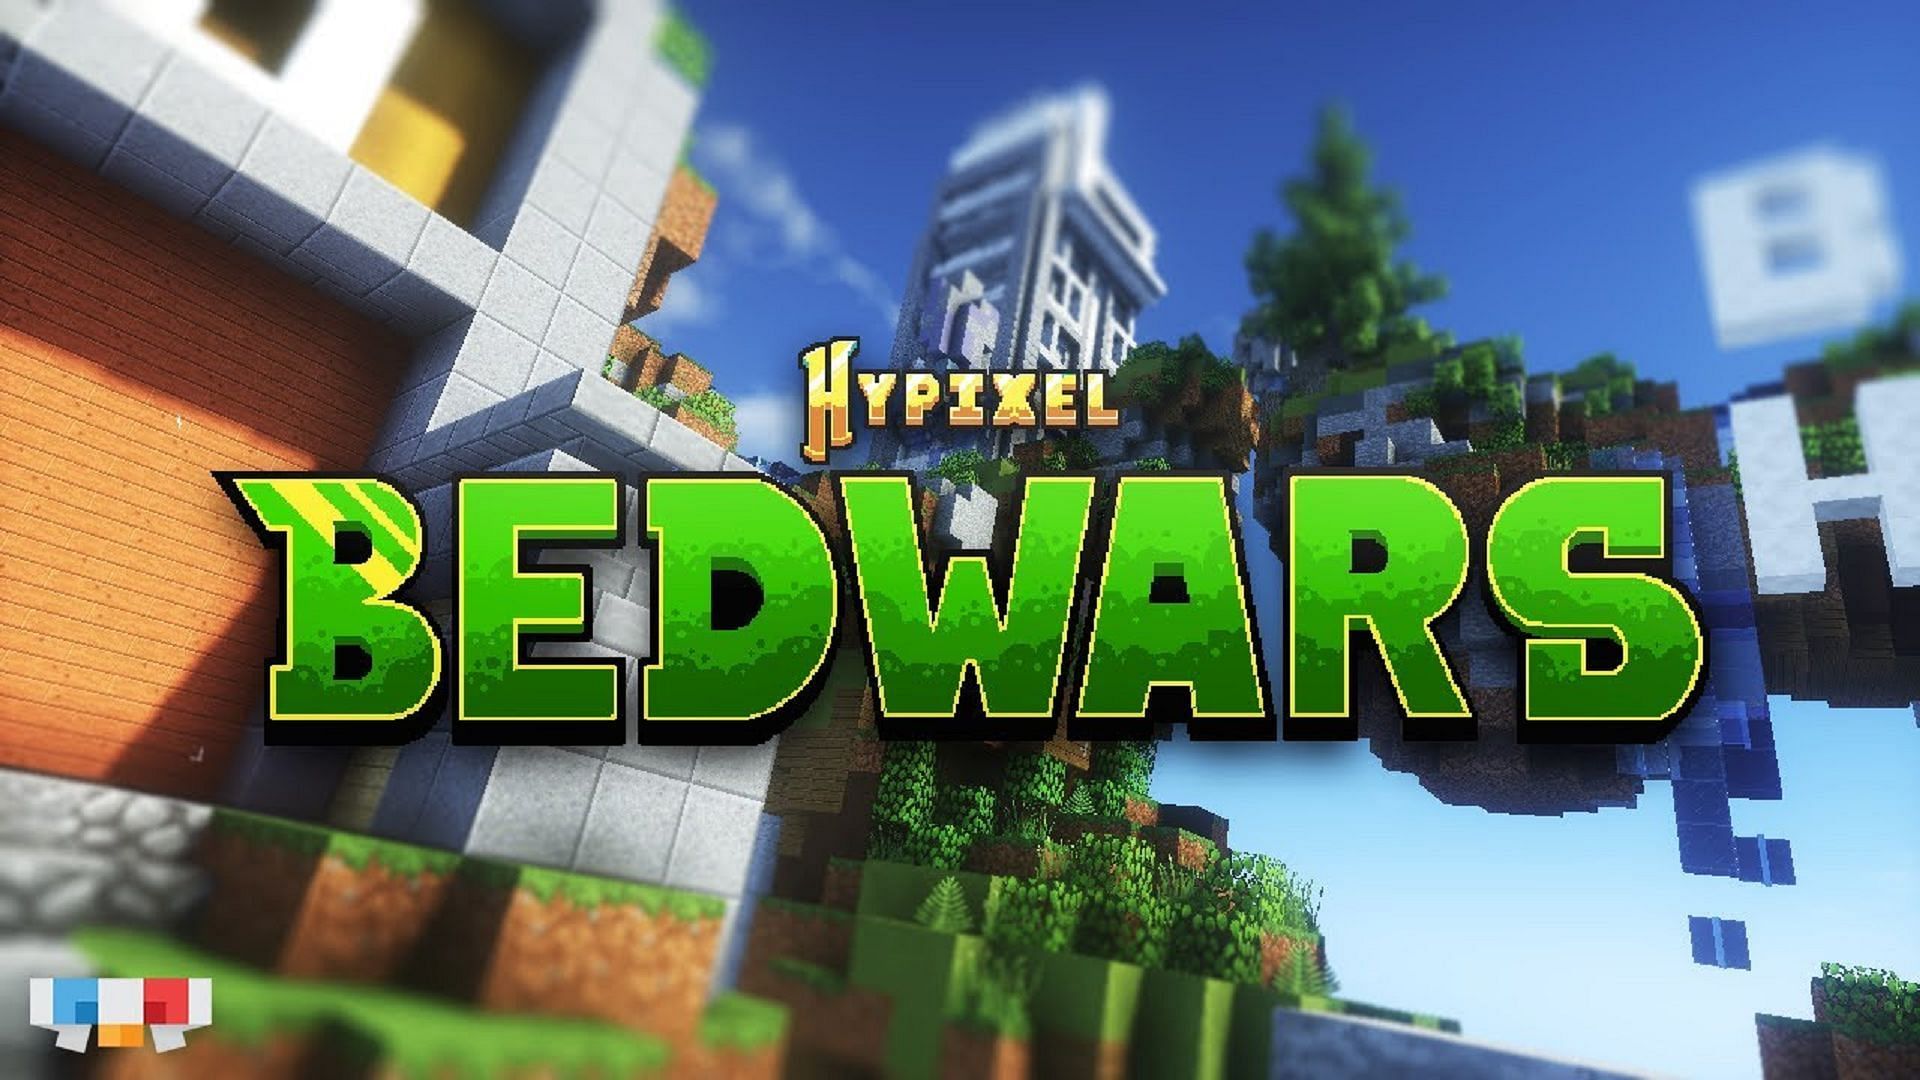 Hypixel offers Bedwars and many other PvP game modes (Image via Hypixel.net)